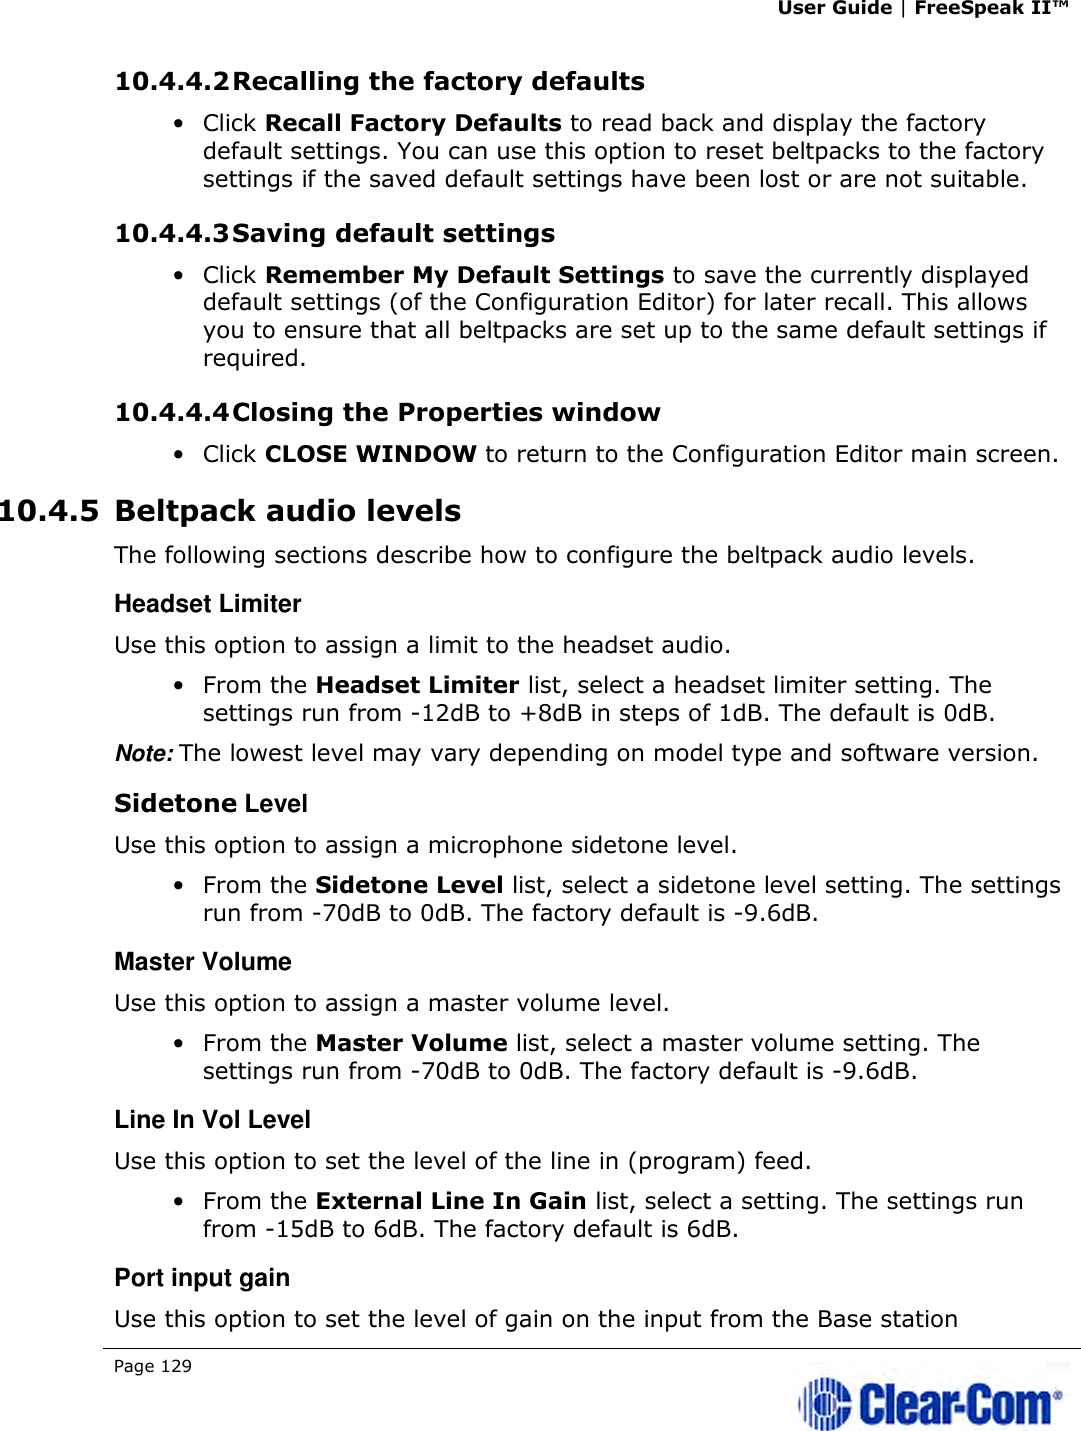 User Guide | FreeSpeak II™  Page 129   10.4.4.2 Recalling the factory defaults • Click Recall Factory Defaults to read back and display the factory default settings. You can use this option to reset beltpacks to the factory settings if the saved default settings have been lost or are not suitable. 10.4.4.3 Saving default settings • Click Remember My Default Settings to save the currently displayed default settings (of the Configuration Editor) for later recall. This allows you to ensure that all beltpacks are set up to the same default settings if required. 10.4.4.4 Closing the Properties window • Click CLOSE WINDOW to return to the Configuration Editor main screen. 10.4.5 Beltpack audio levels The following sections describe how to configure the beltpack audio levels. Headset Limiter Use this option to assign a limit to the headset audio. • From the Headset Limiter list, select a headset limiter setting. The settings run from -12dB to +8dB in steps of 1dB. The default is 0dB. Note: The lowest level may vary depending on model type and software version. Sidetone Level Use this option to assign a microphone sidetone level. • From the Sidetone Level list, select a sidetone level setting. The settings run from -70dB to 0dB. The factory default is -9.6dB. Master Volume Use this option to assign a master volume level. • From the Master Volume list, select a master volume setting. The settings run from -70dB to 0dB. The factory default is -9.6dB. Line In Vol Level Use this option to set the level of the line in (program) feed. • From the External Line In Gain list, select a setting. The settings run from -15dB to 6dB. The factory default is 6dB. Port input gain Use this option to set the level of gain on the input from the Base station 